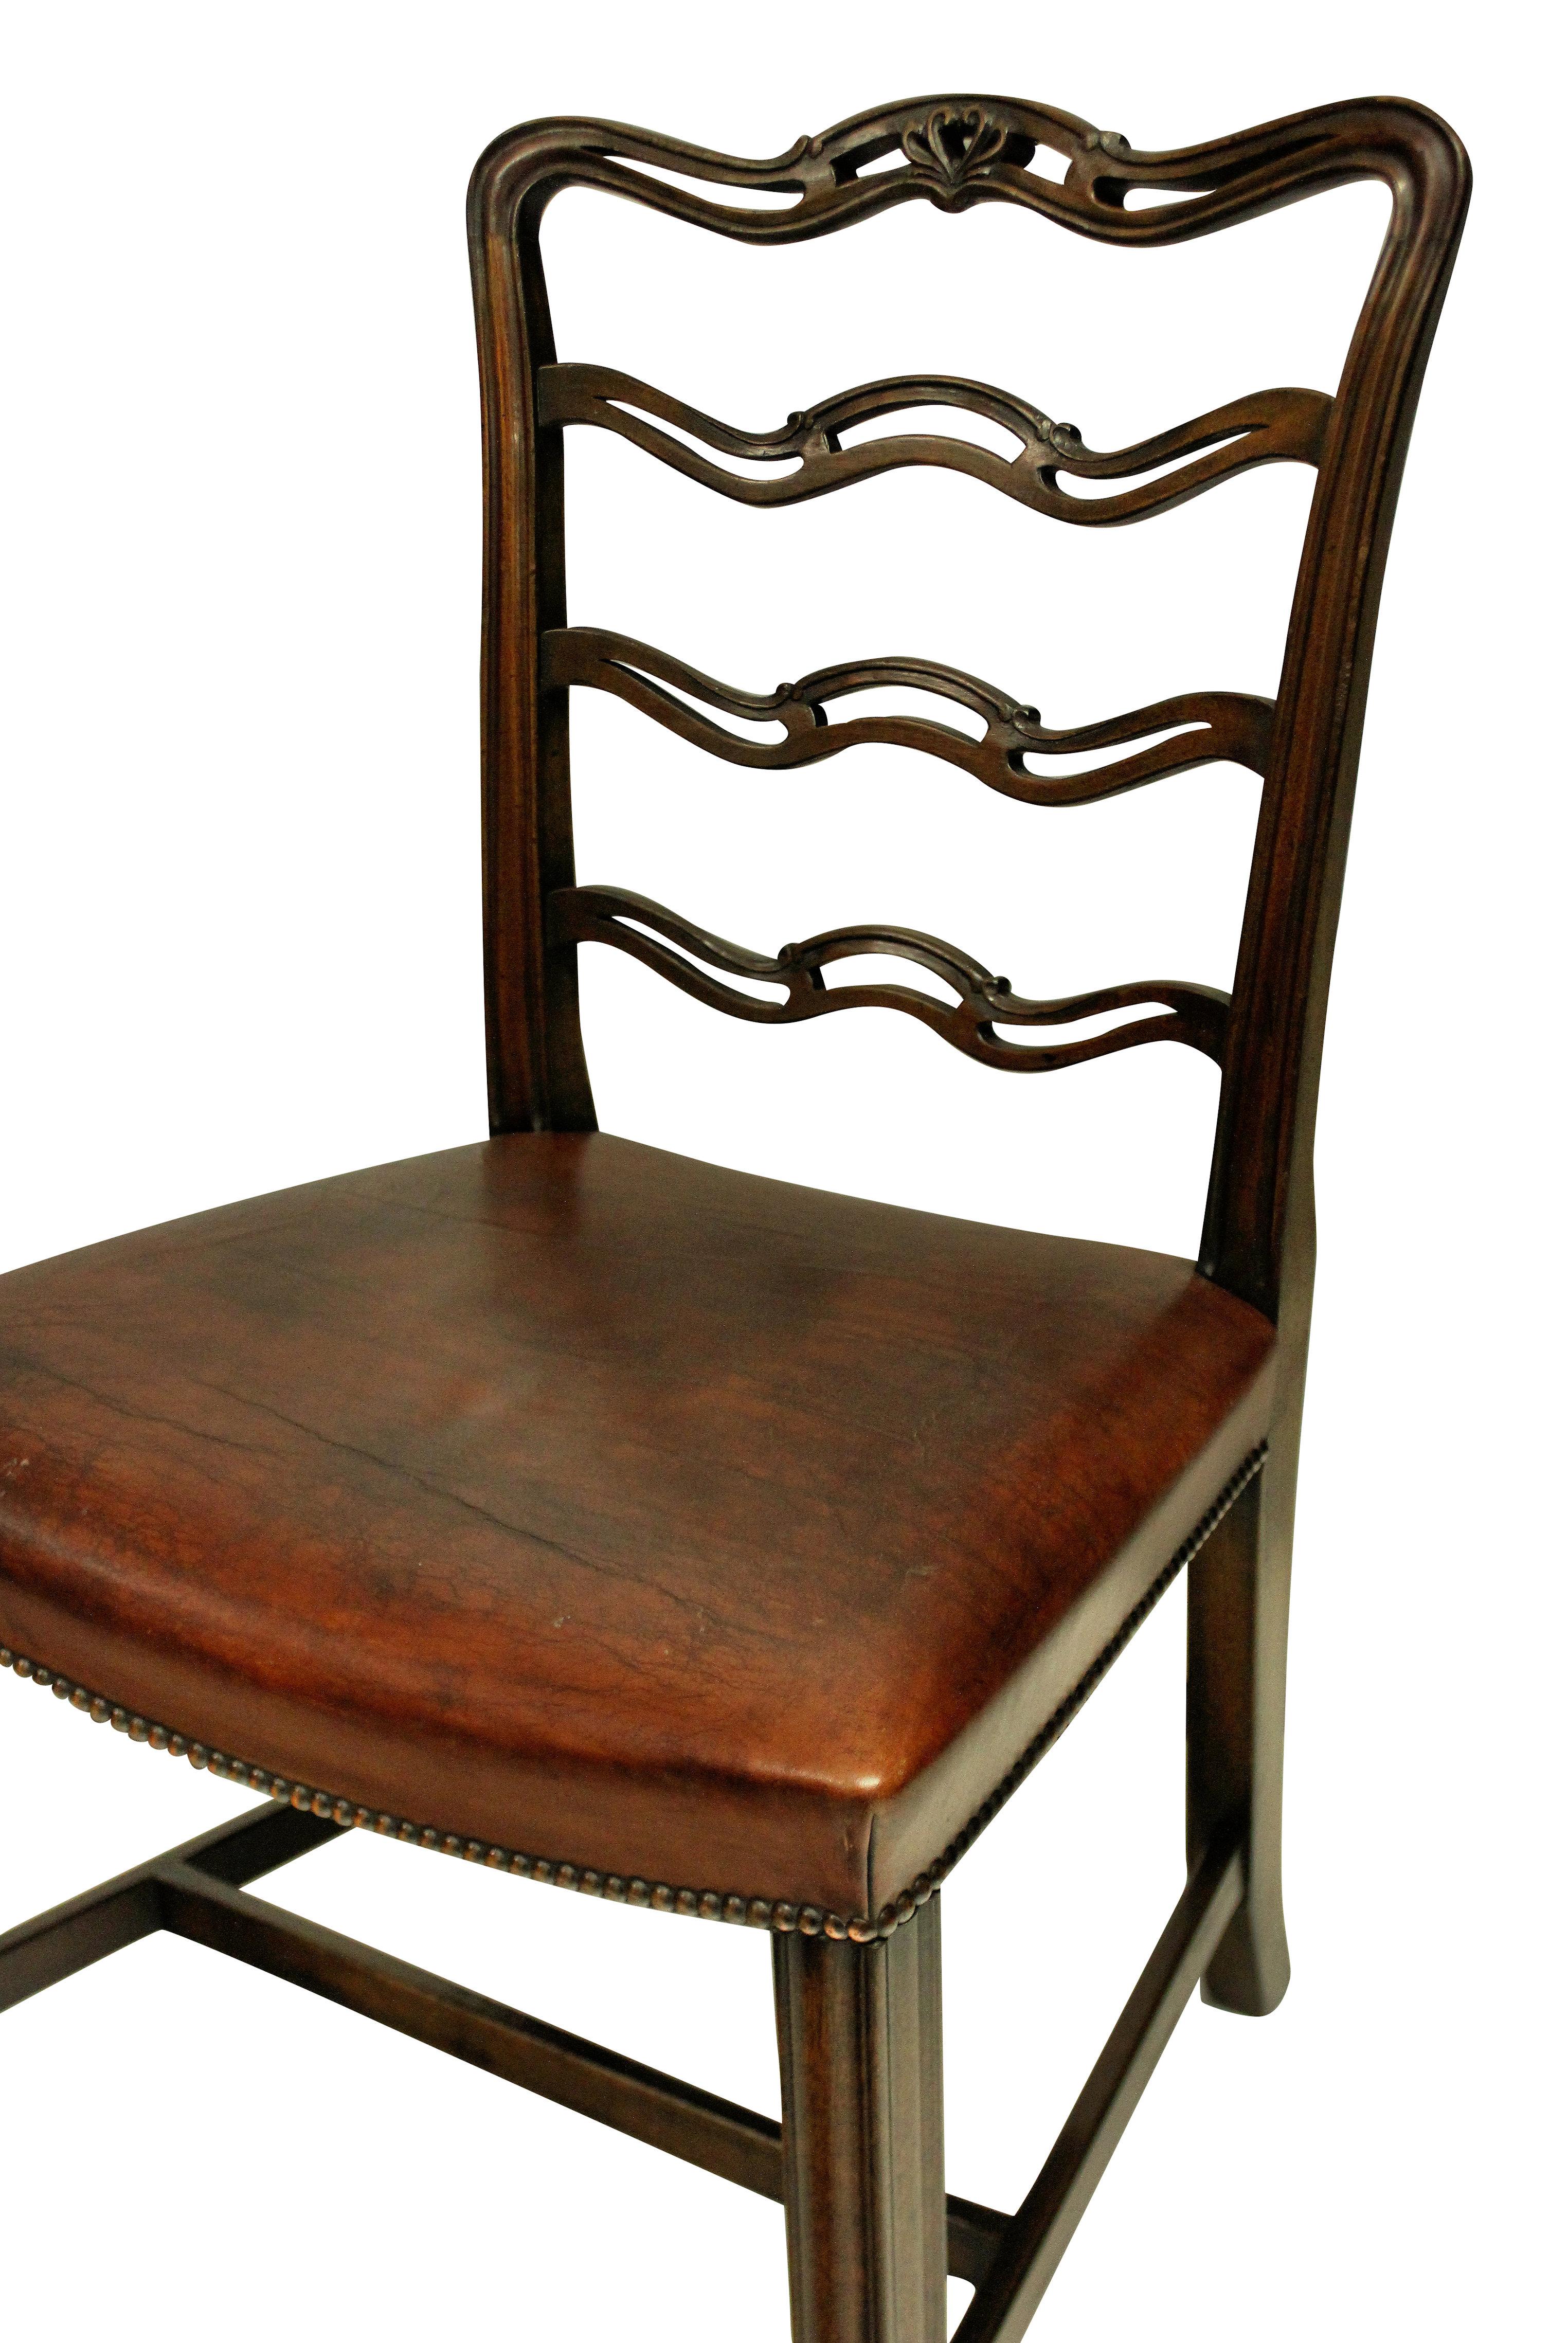 A set of six George III style mahogany ladder back dining chairs with the concave seats upholstered in leather with stud detail.